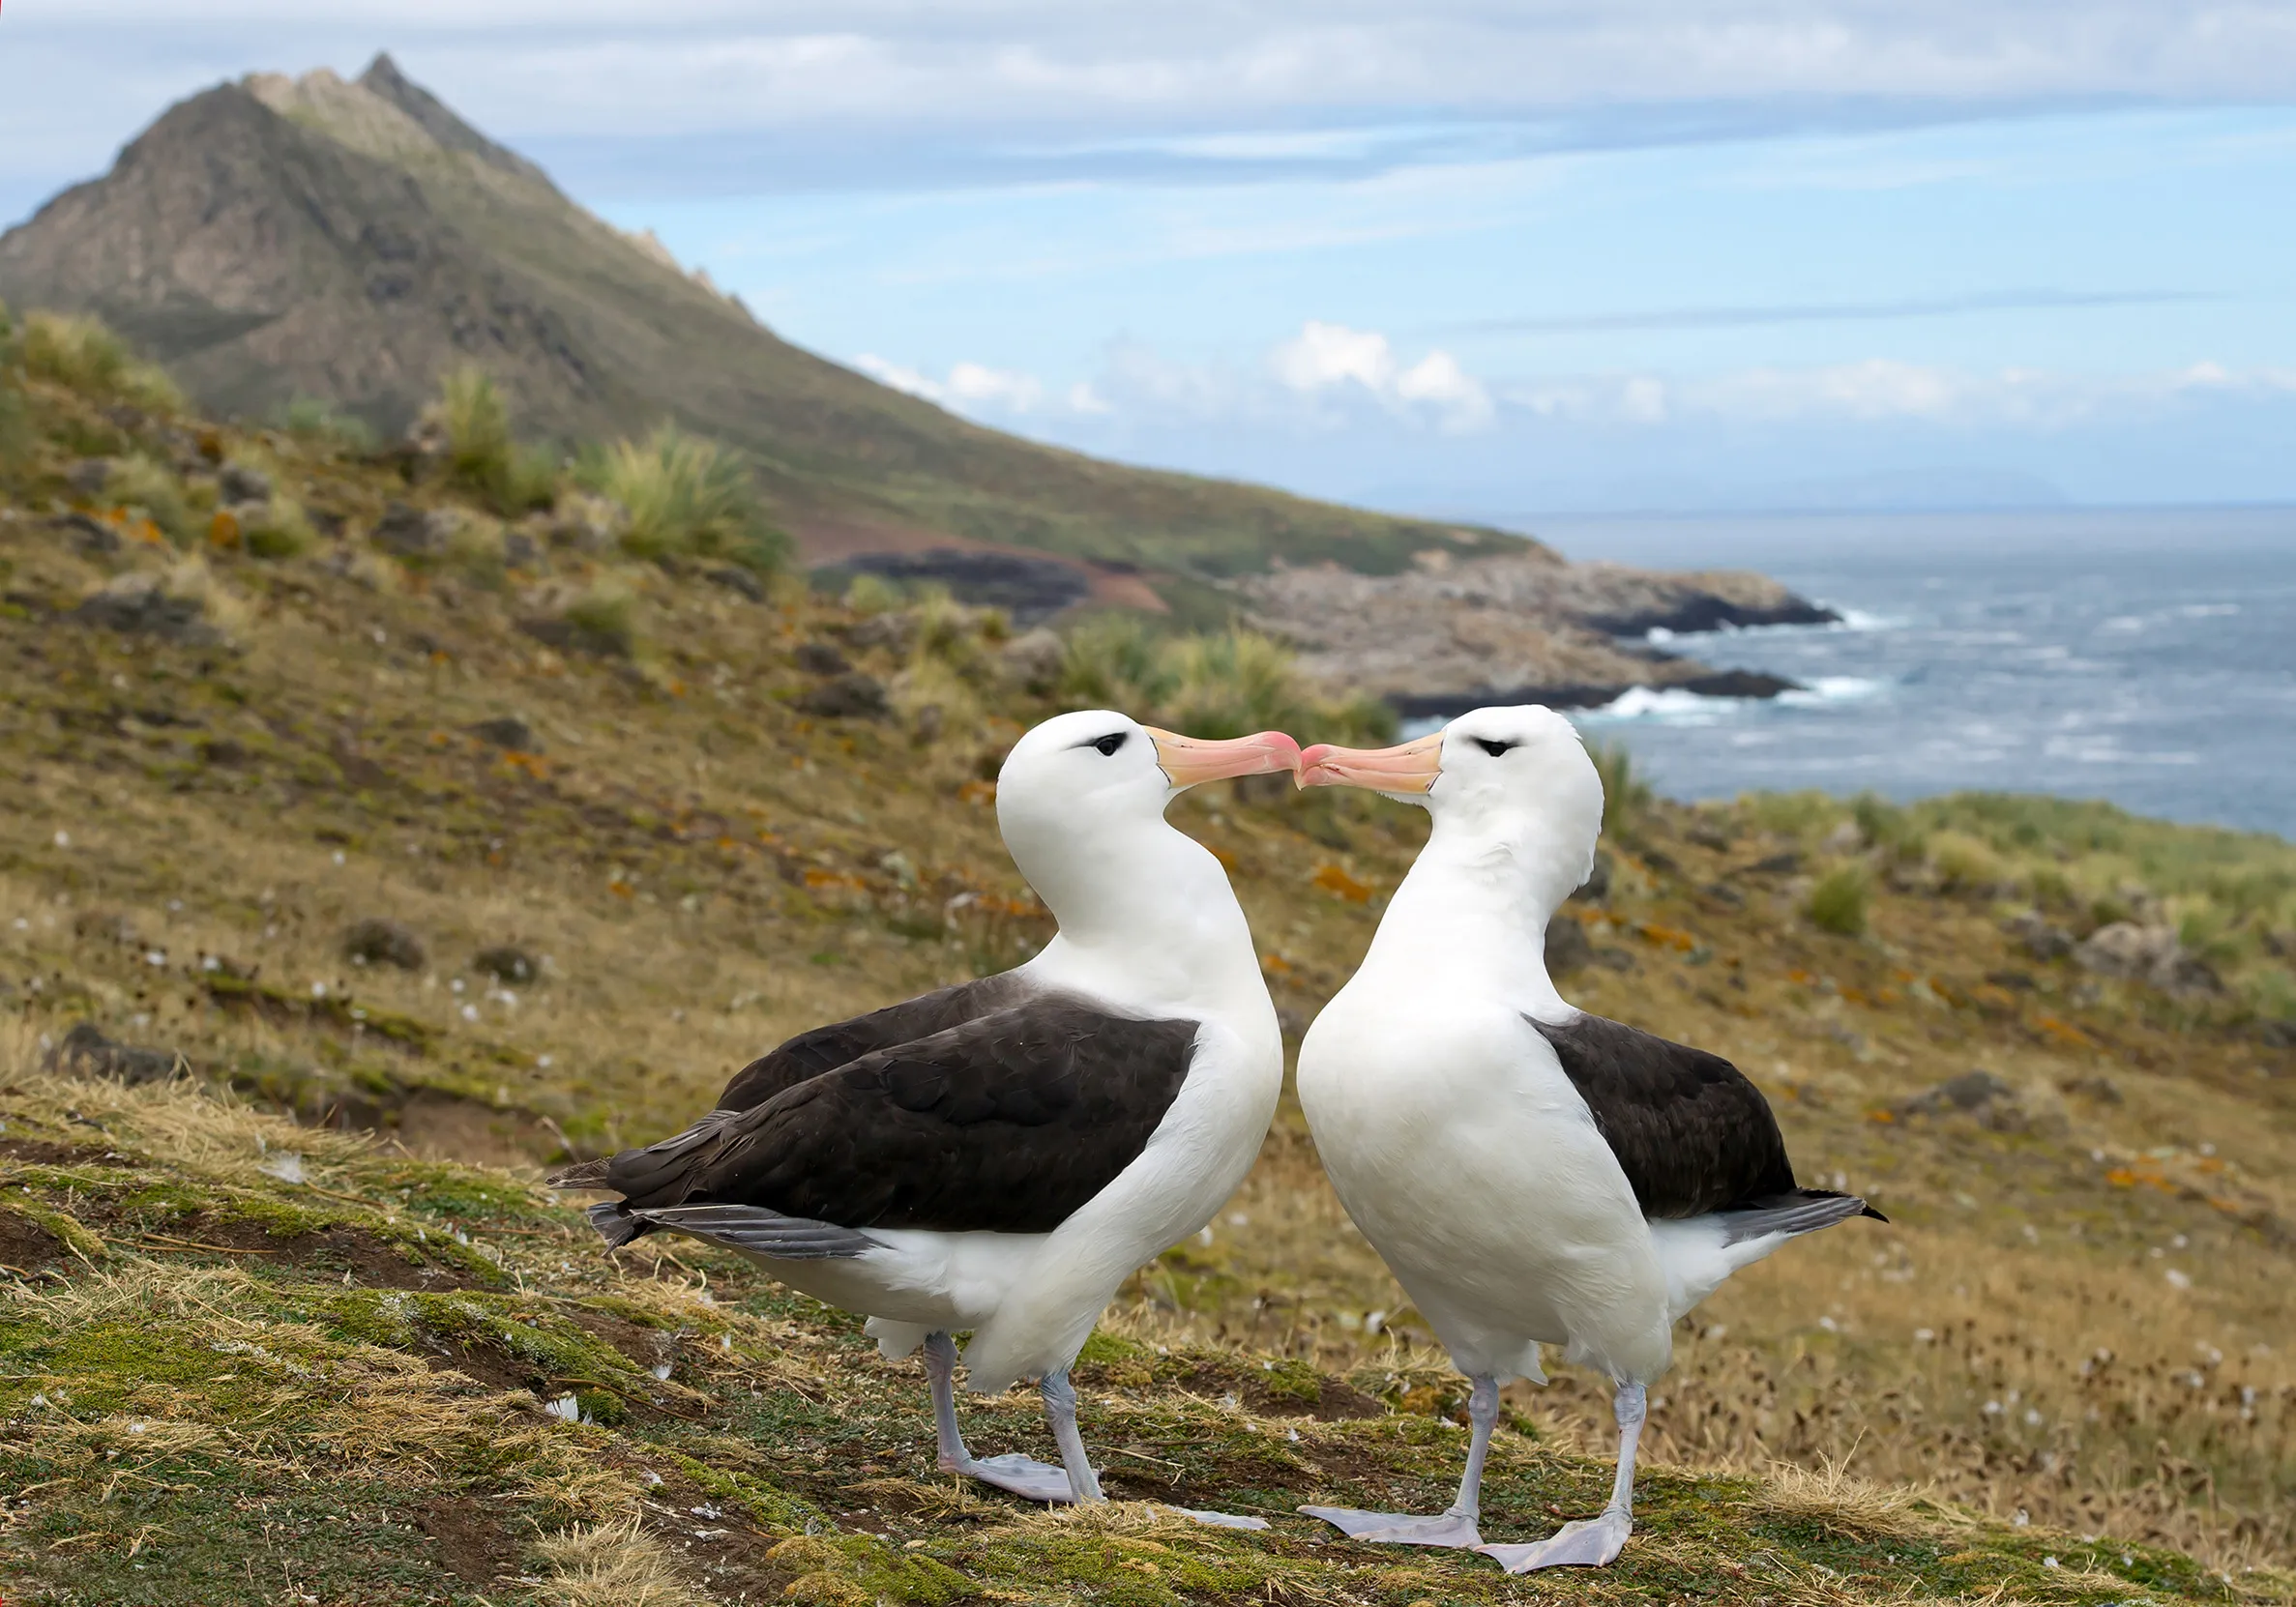 A pair of Black-browed Albatross on a nest preparing to mate.